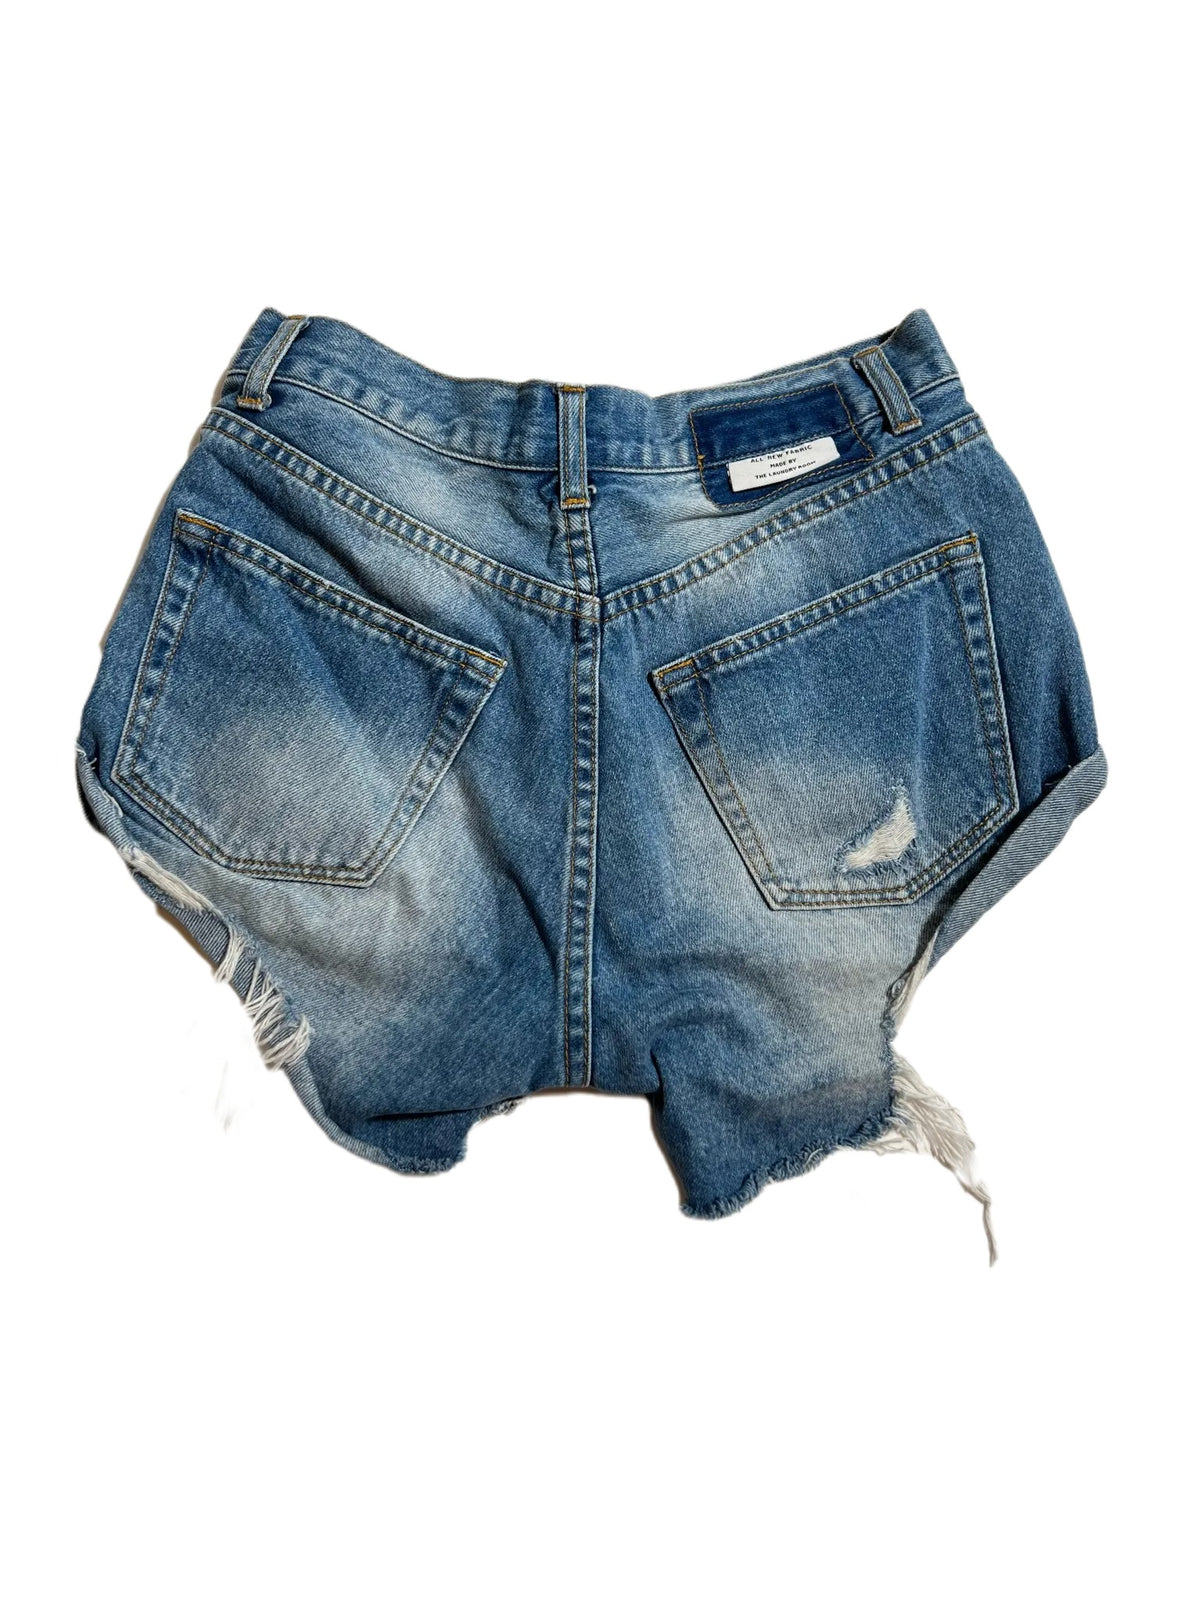 The Laundry Room- Light Washed High Waisted Jean Shorts